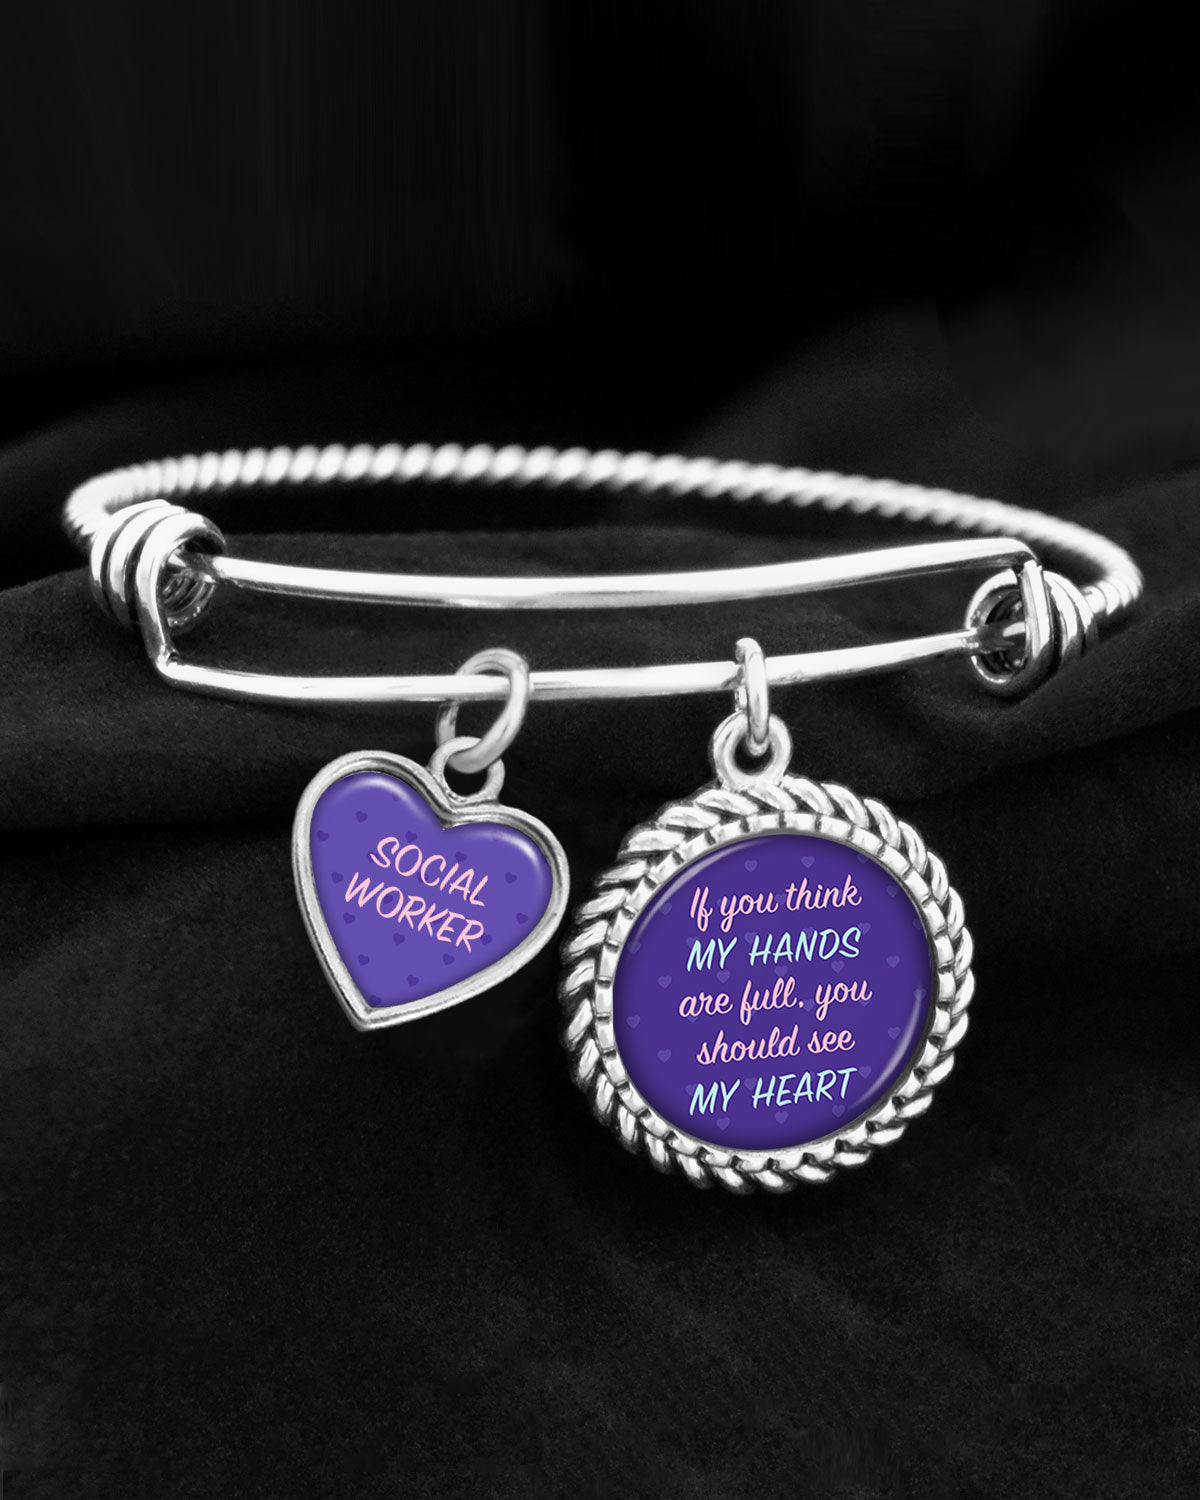 Social Worker - If You Think My Hands Are Full, You Should See My Heart Charm Bracelet